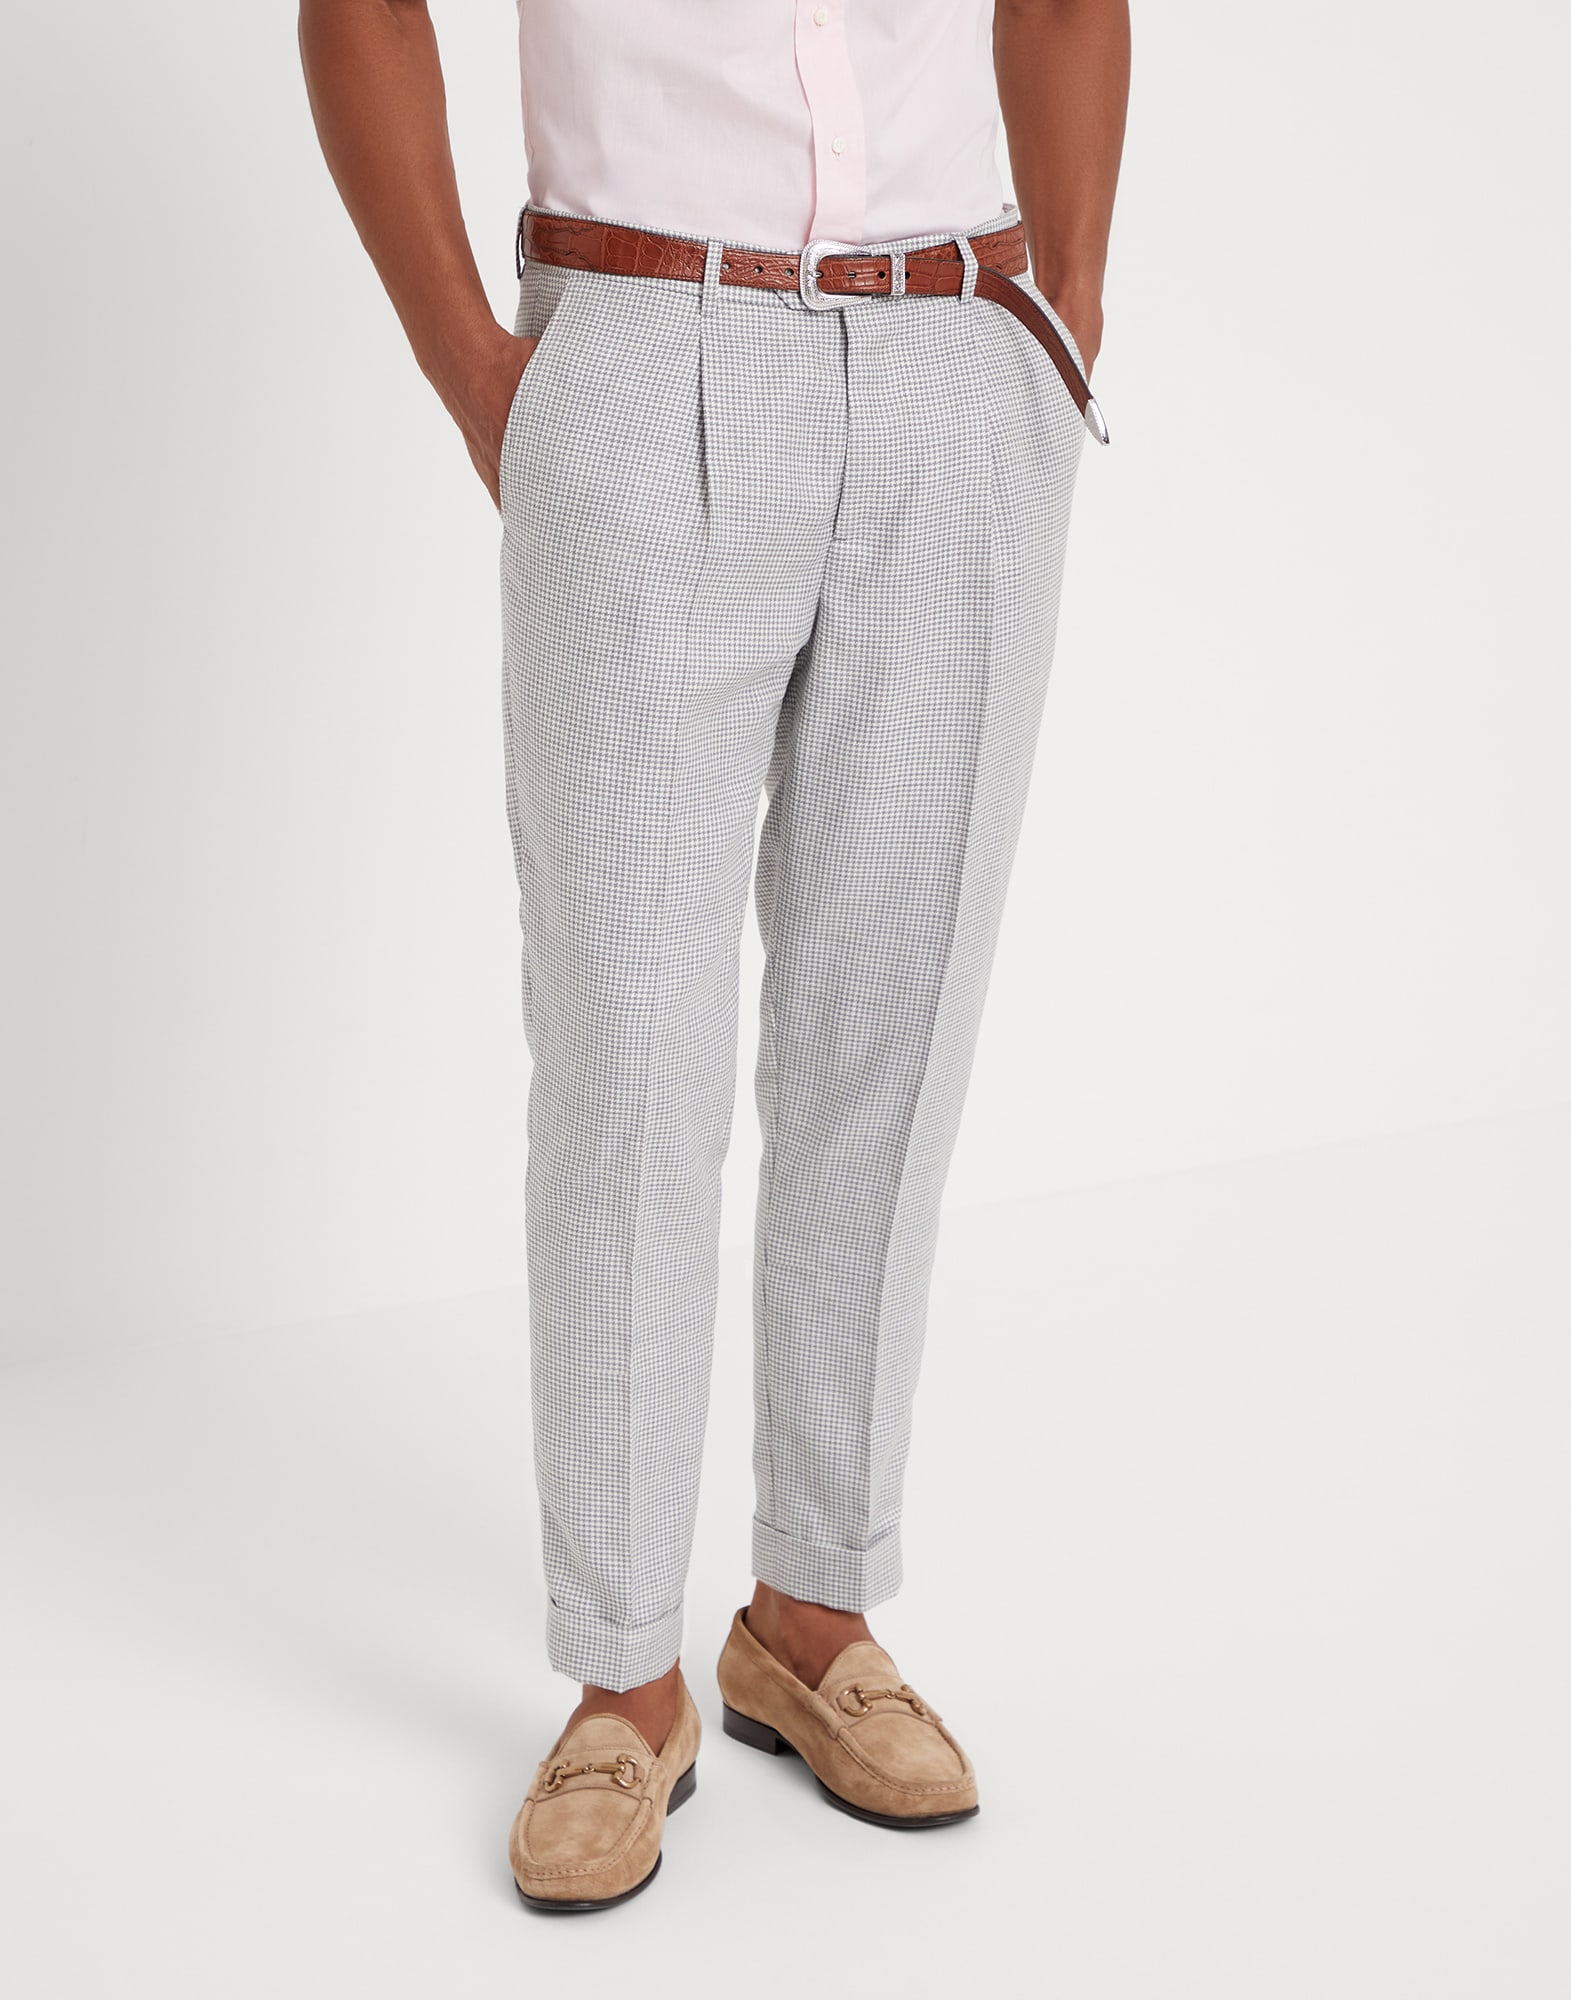 Houndstooth trousers Pearl Grey Man - Brunello Cucinelli